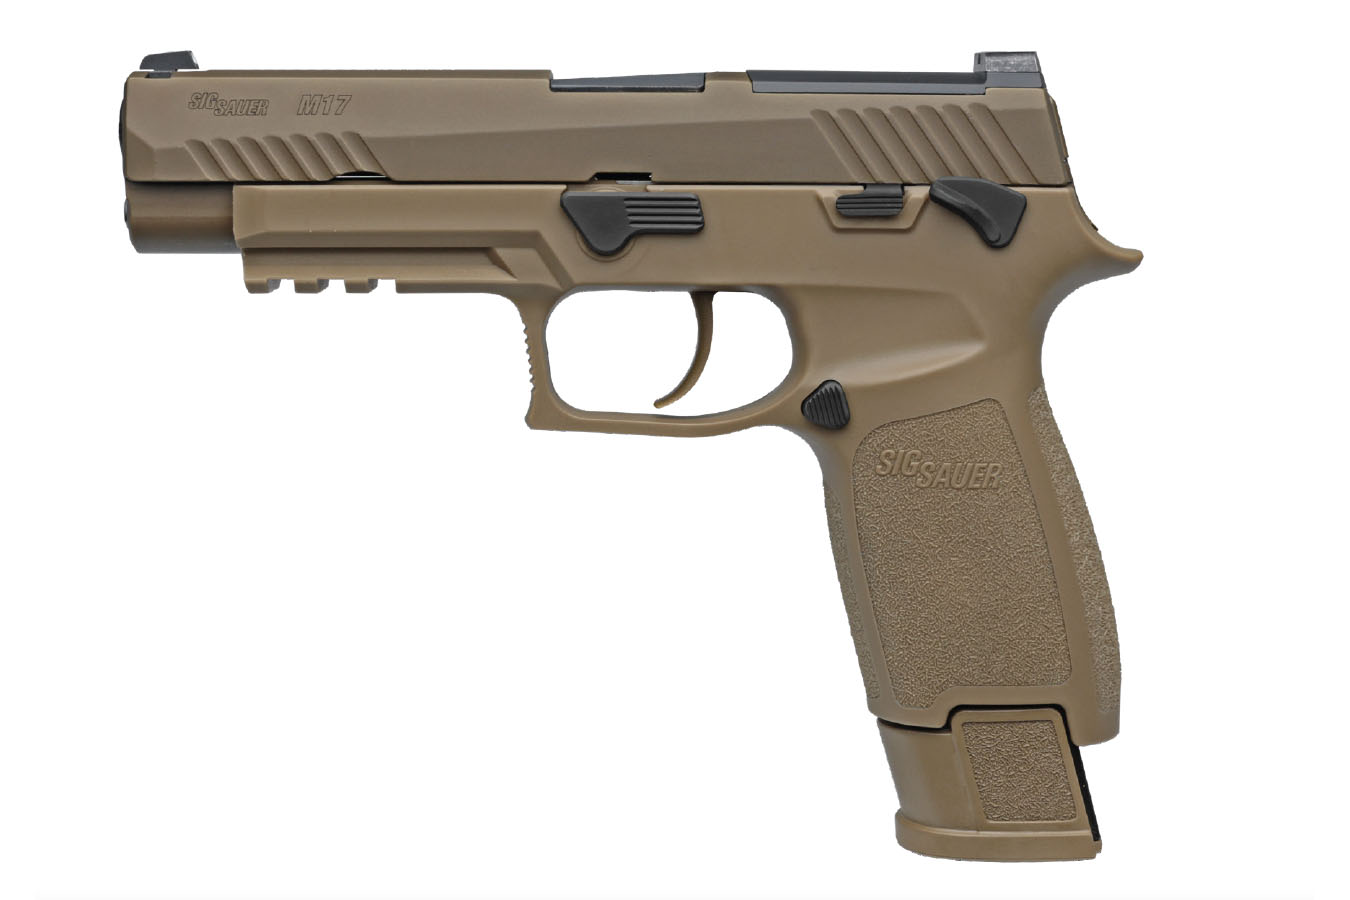 SIG SAUER P320-M17 9MM FULL SIZE COYOTE PISTOL (LE)